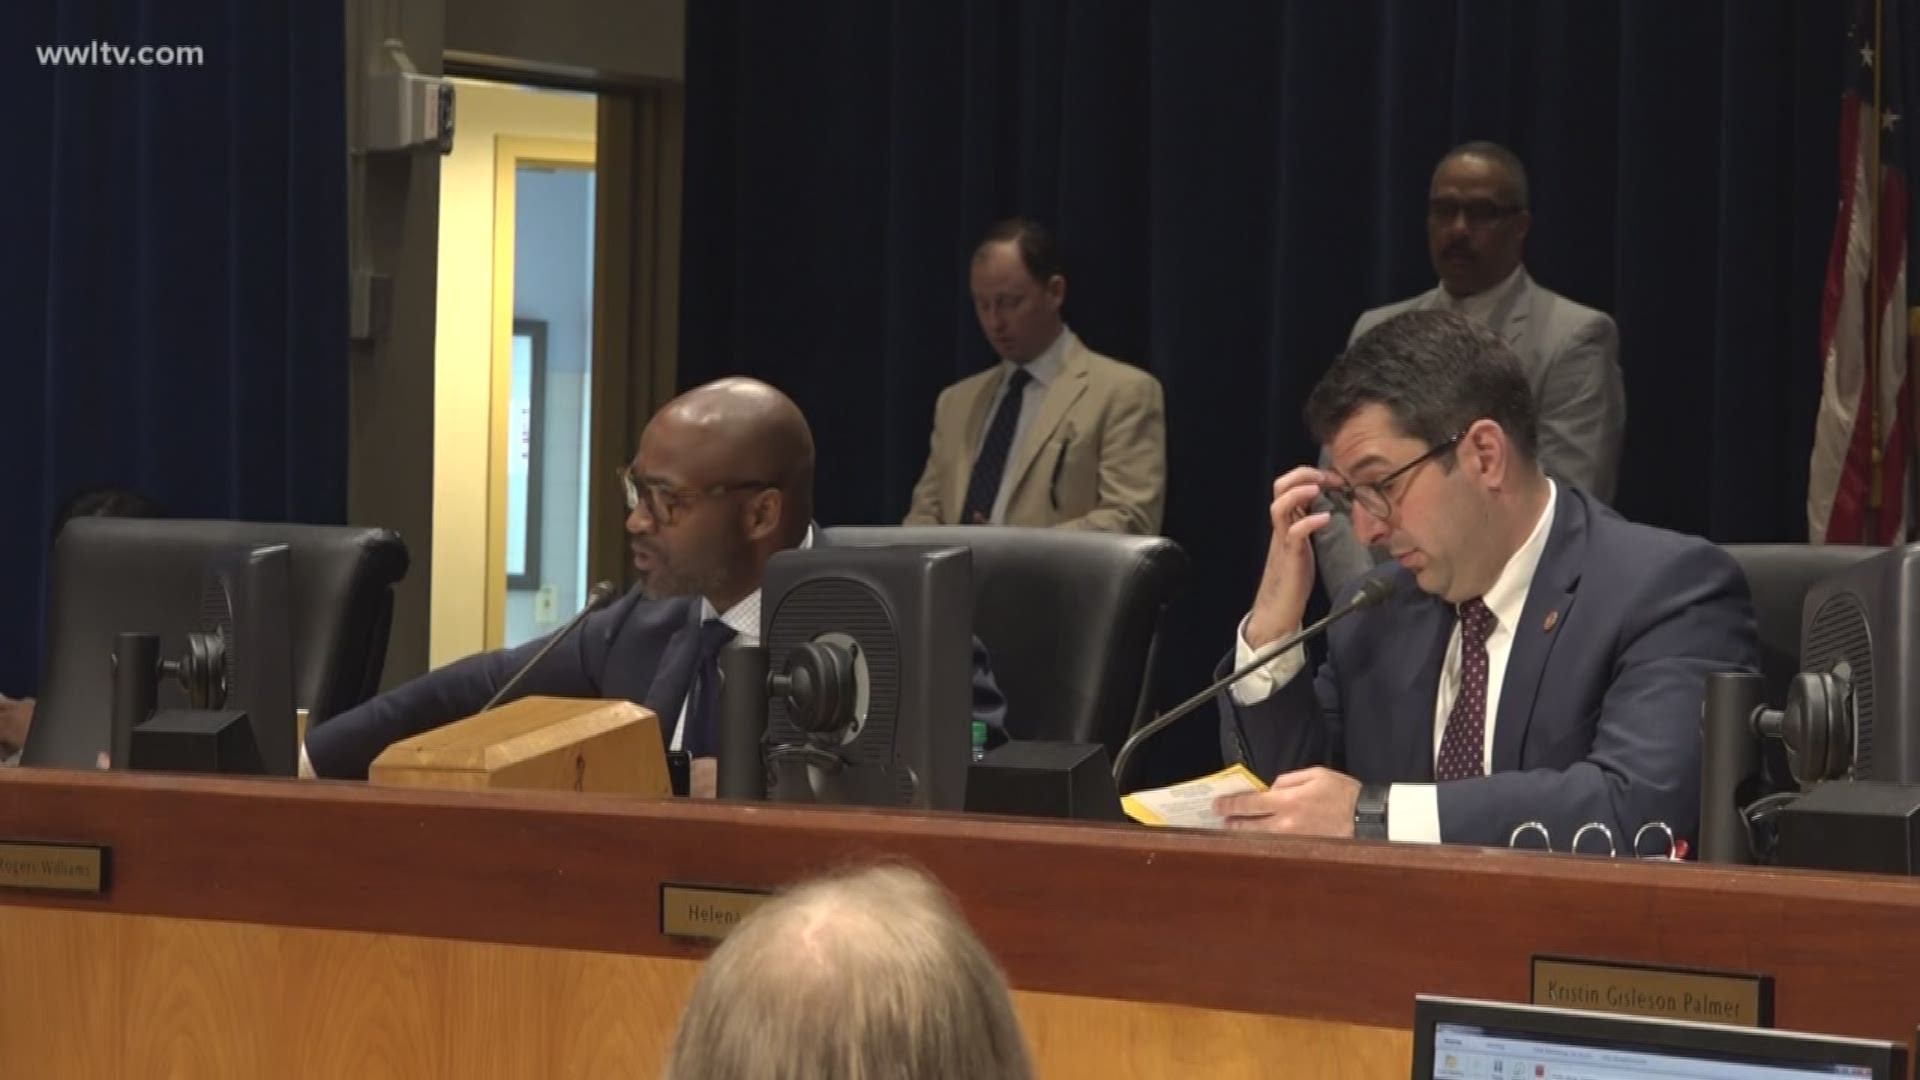 During a public works meeting today, council members were prepared to ask Mayor Cantrell's administration and the Sewerage and Water Board questions about the raises and the planned shut offs of water service, but at the last minute, the mayor's staff and